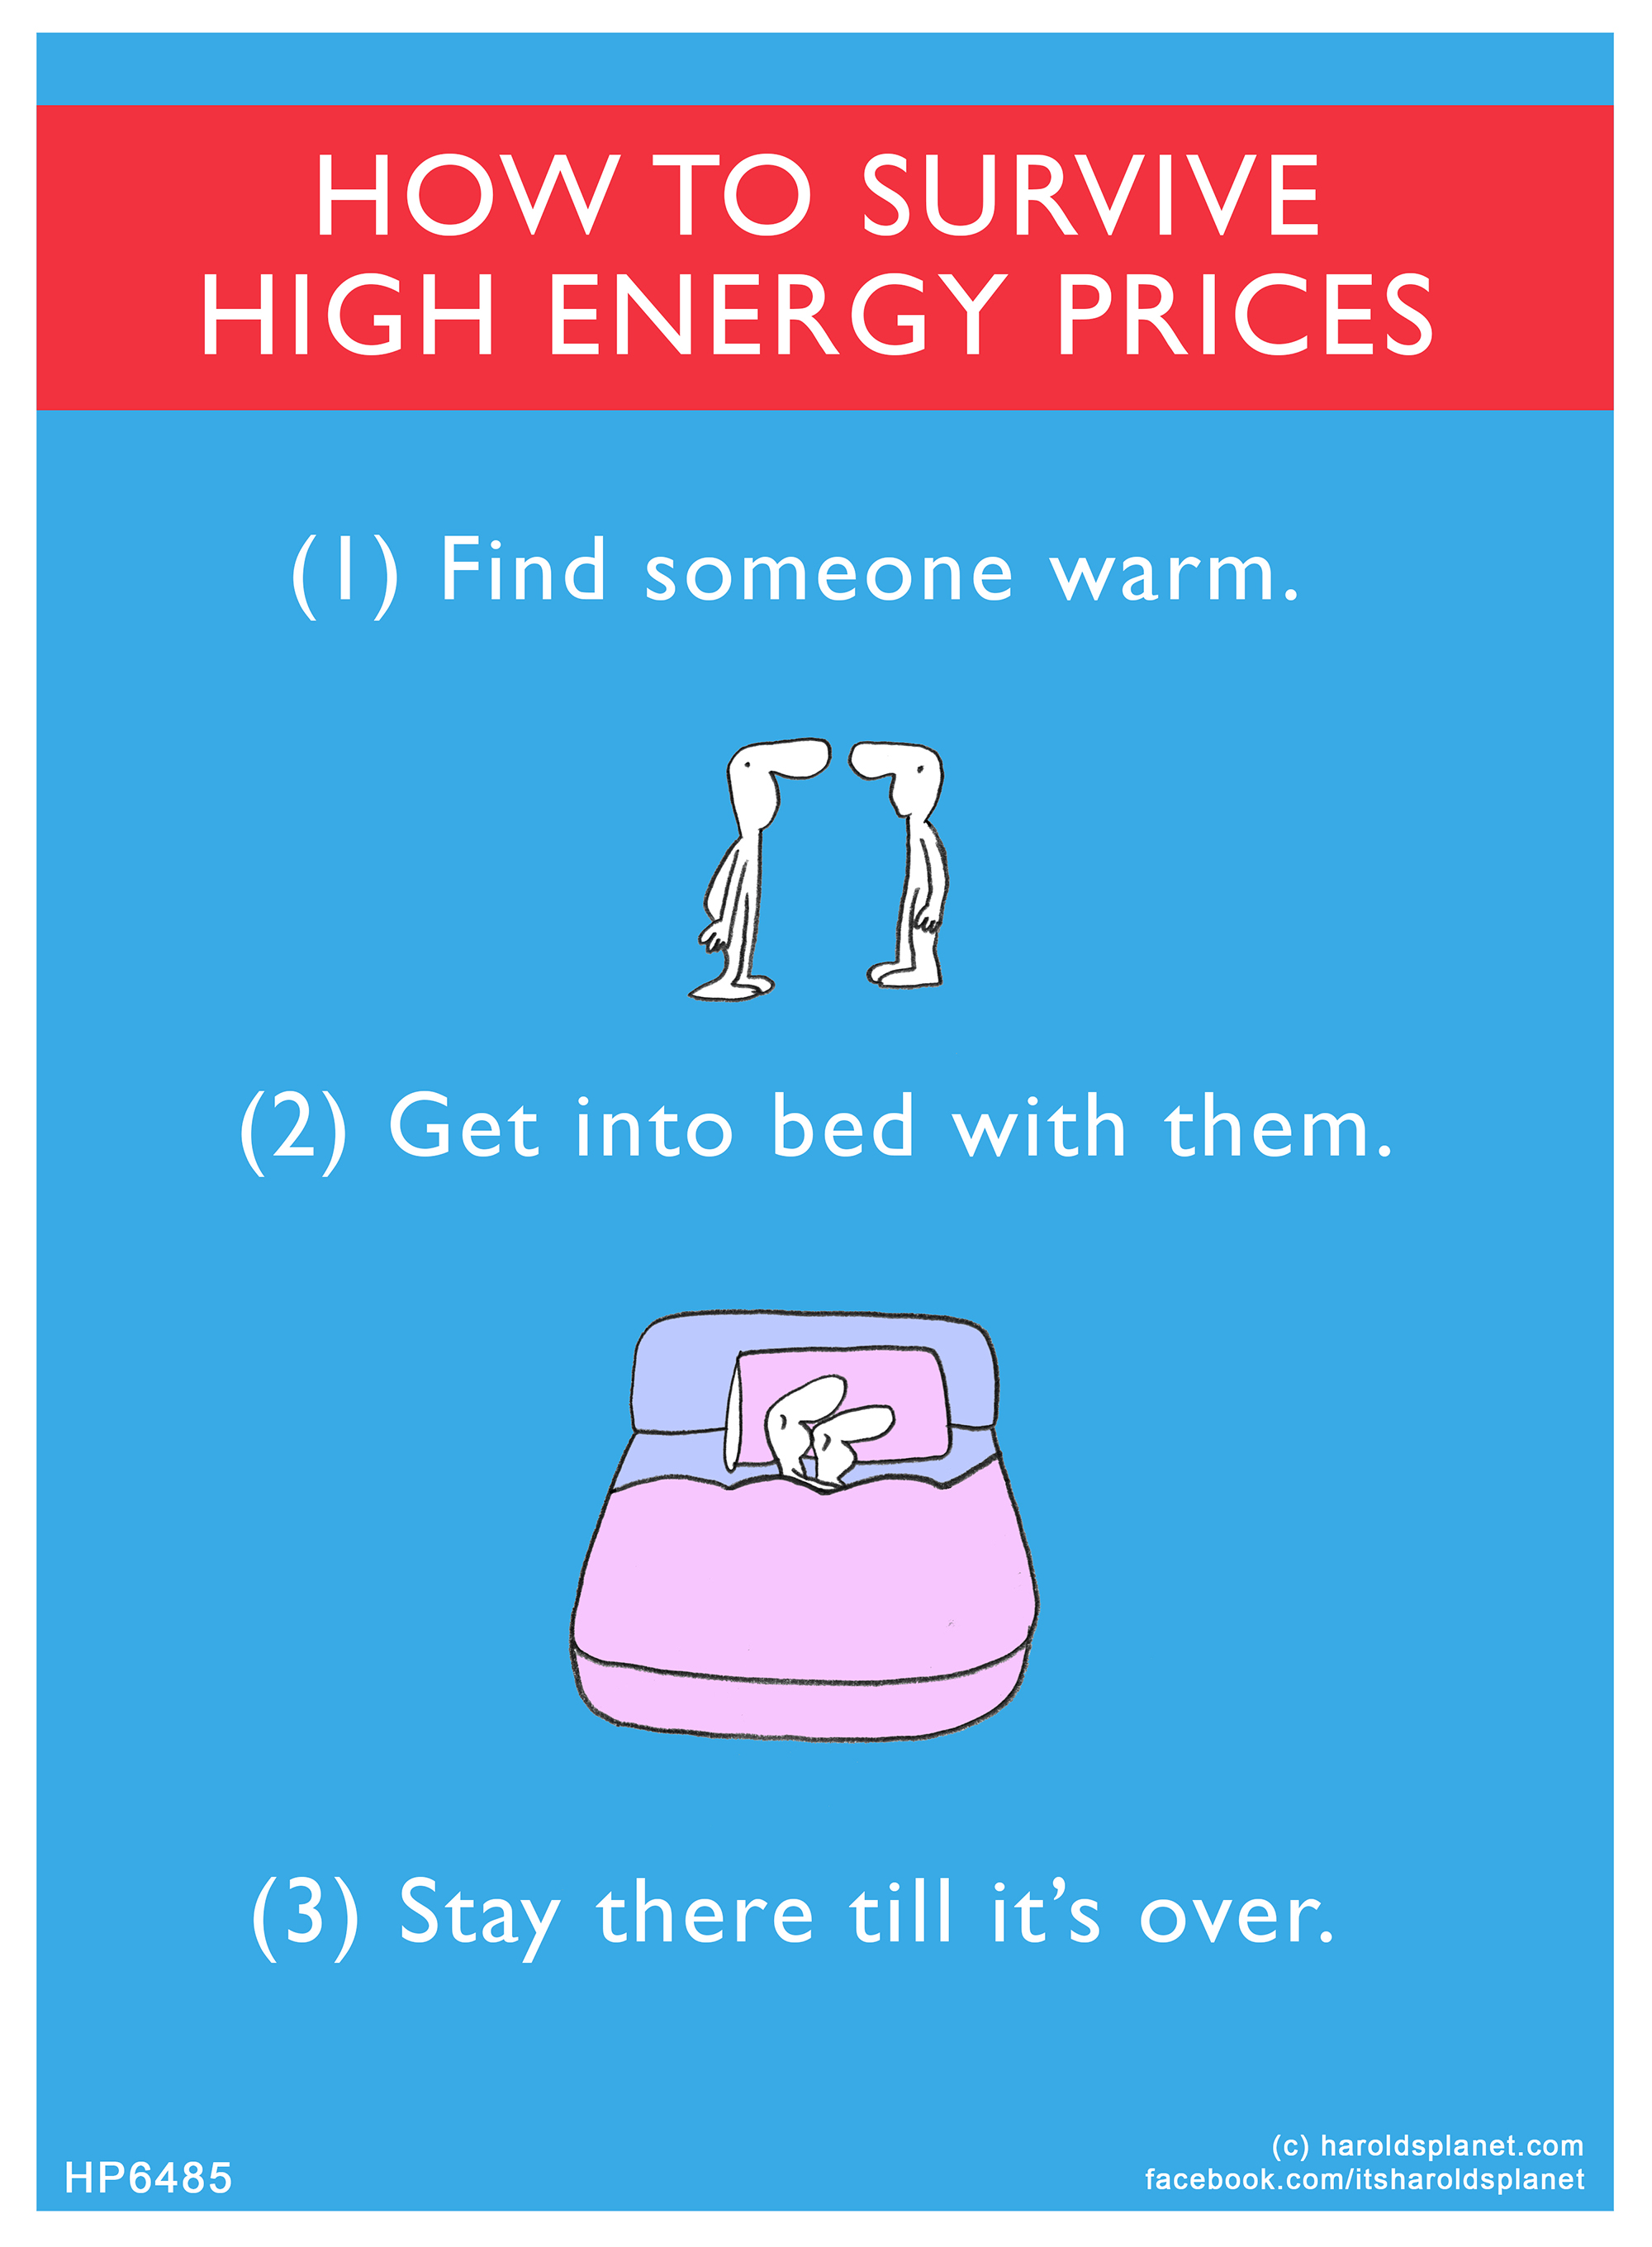 Harold's Planet: HOW TO SURVIVE HIGH ENERGY PRICES: (1) Find someone warm. (2) Get into bed with them. (3) Stay there till it’s over.